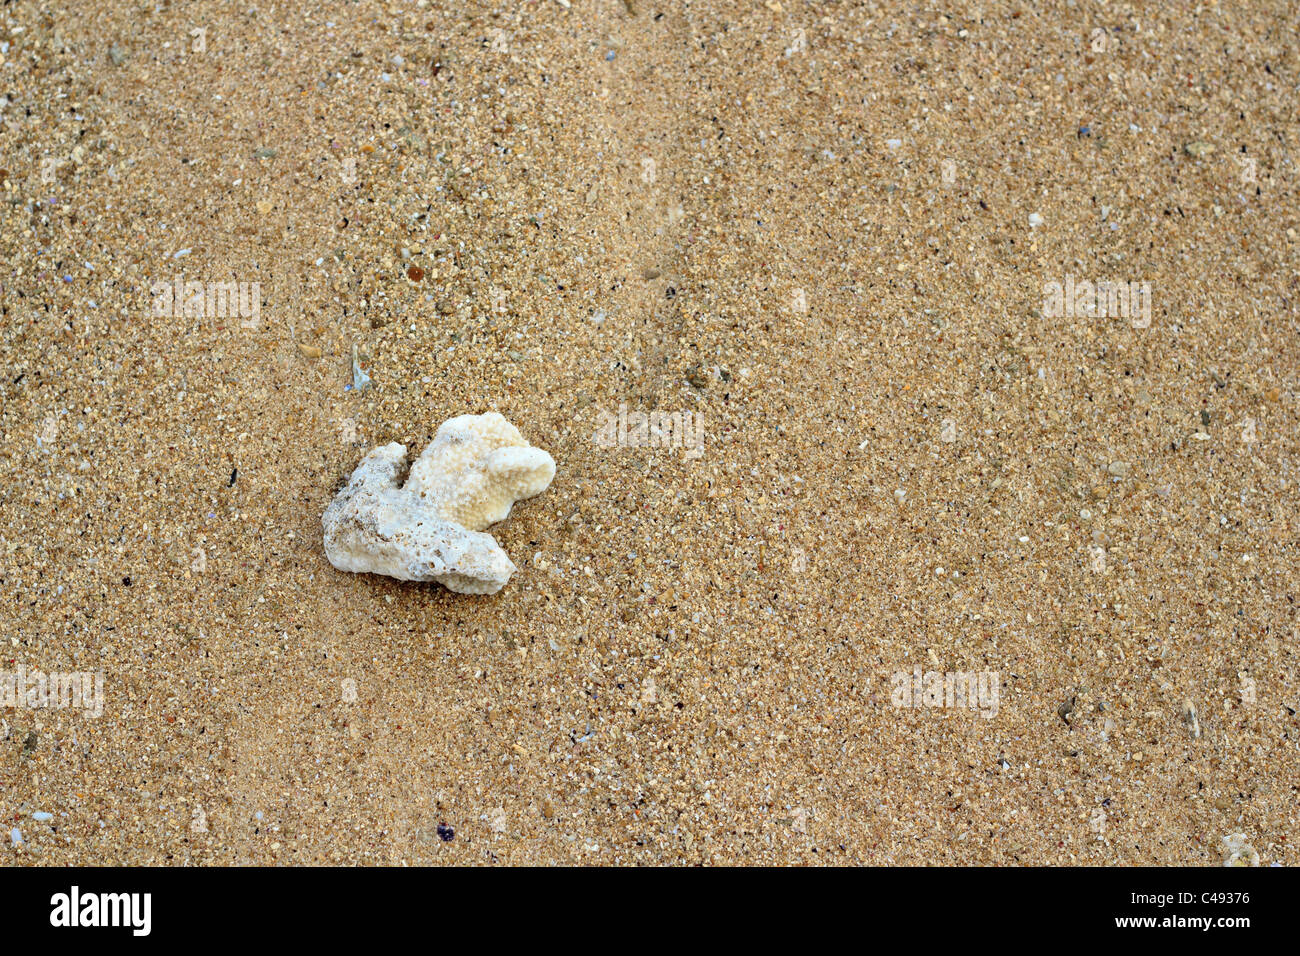 Single coral on sand. Stock Photo